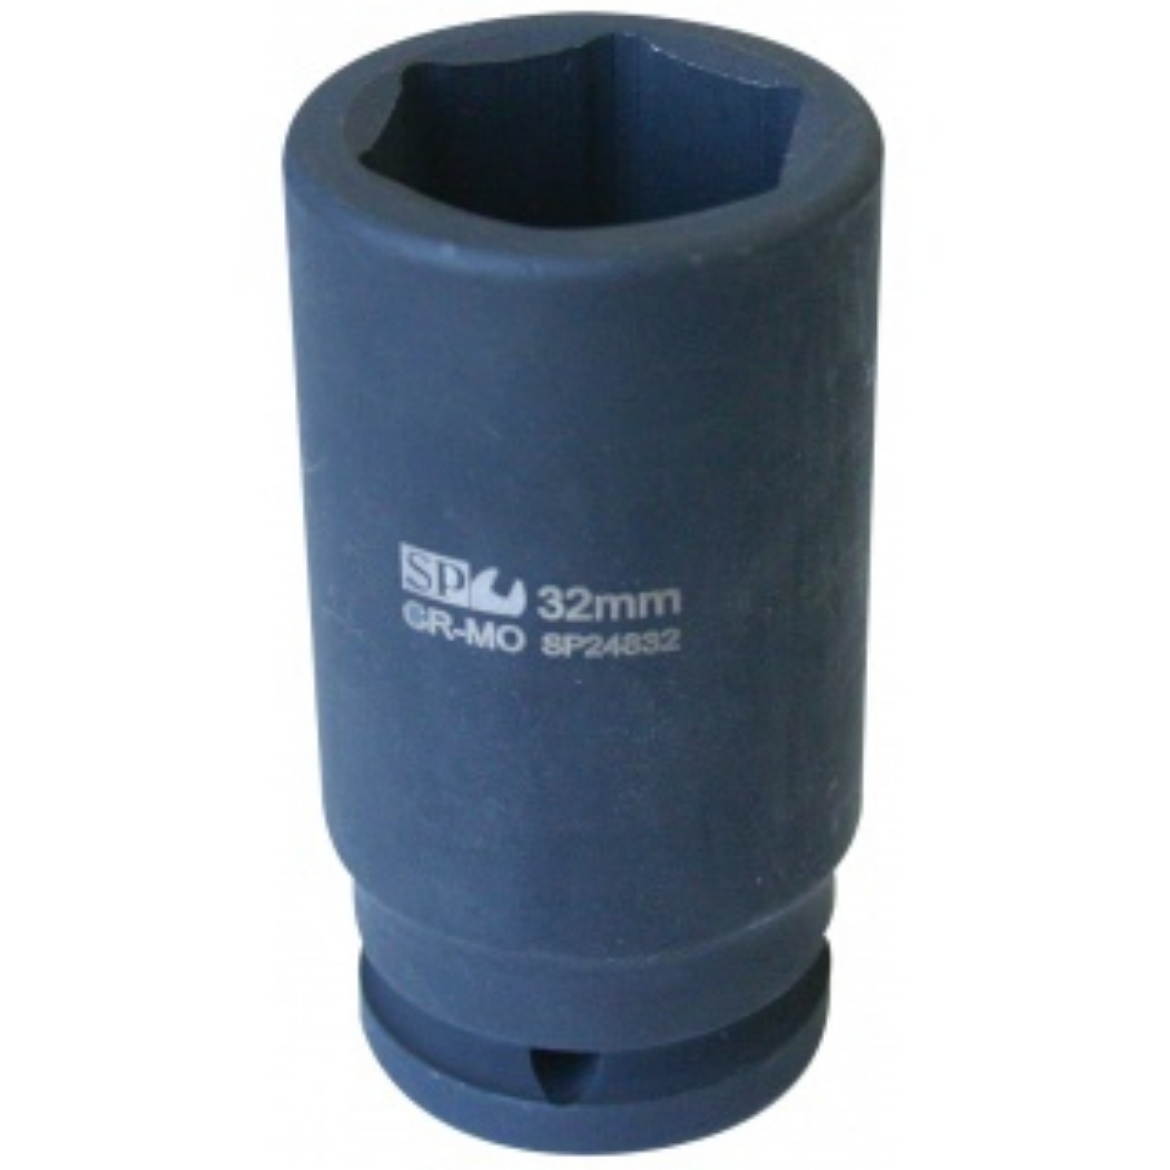 Picture of SOCKET IMPACT 3/4"DR 6PT DEEP METRIC 54MM SP TOOLS